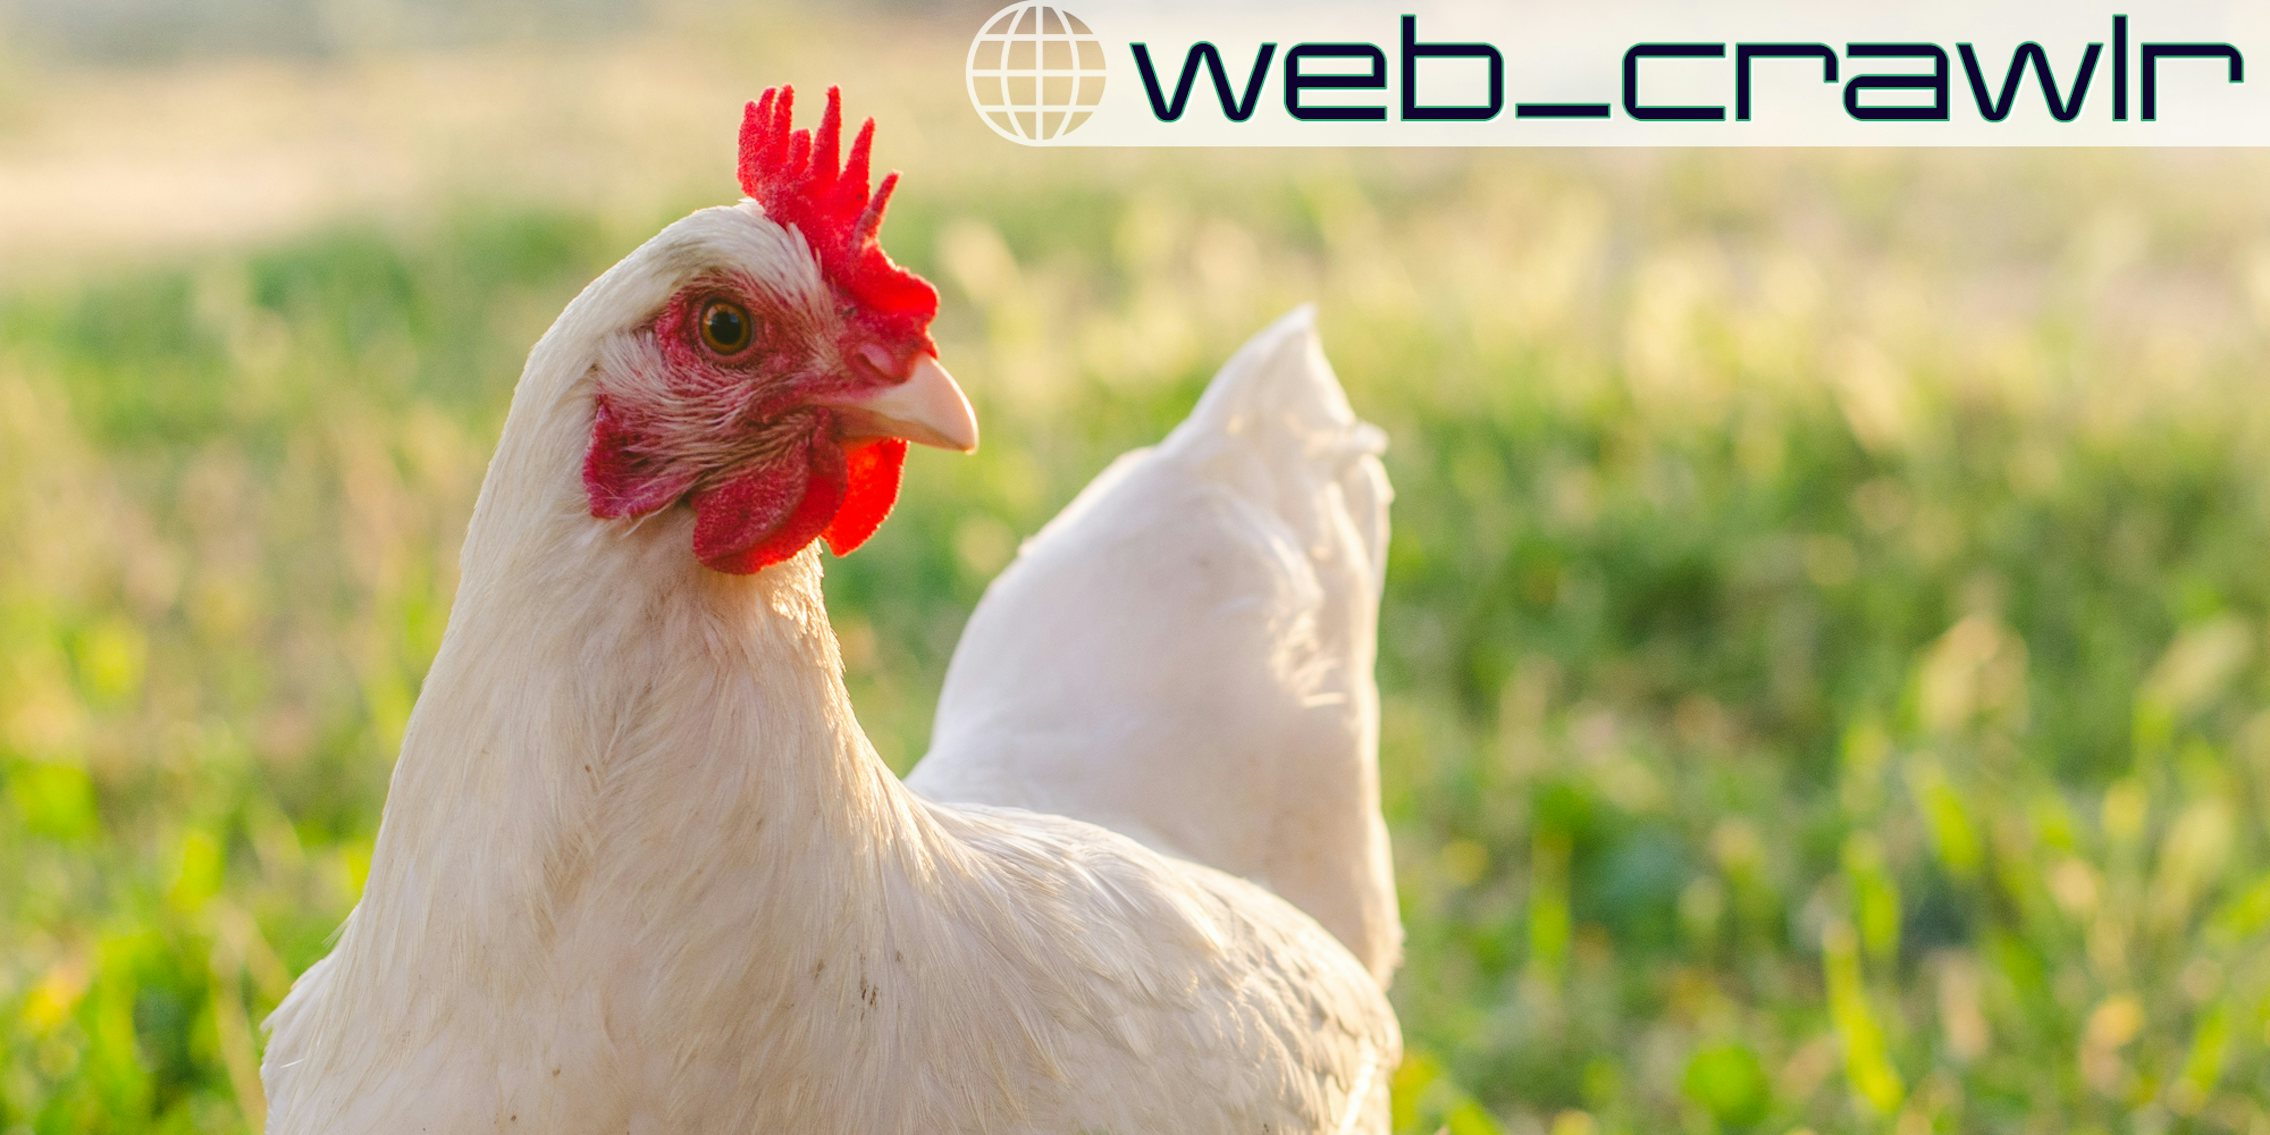 A chicken looking to the right. The Daily Dot newsletter web_crawlr logo is in the top right corner.